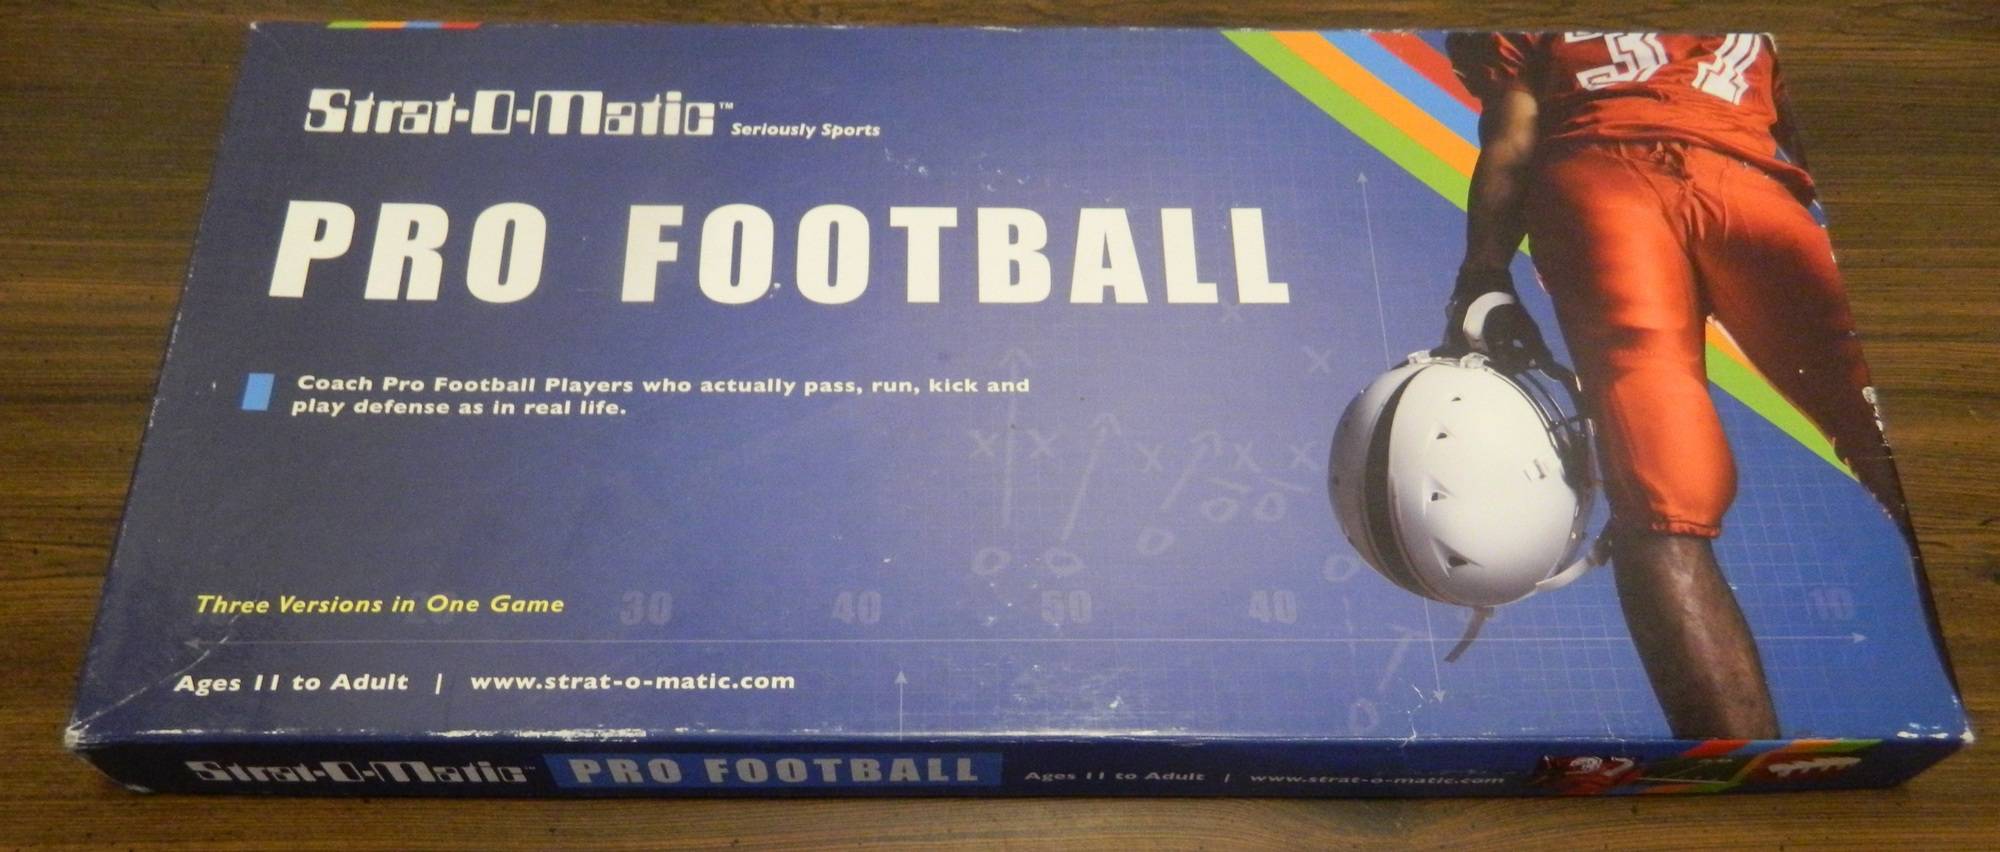 Strat-O-Matic Pro Football Board Game Review and Rules